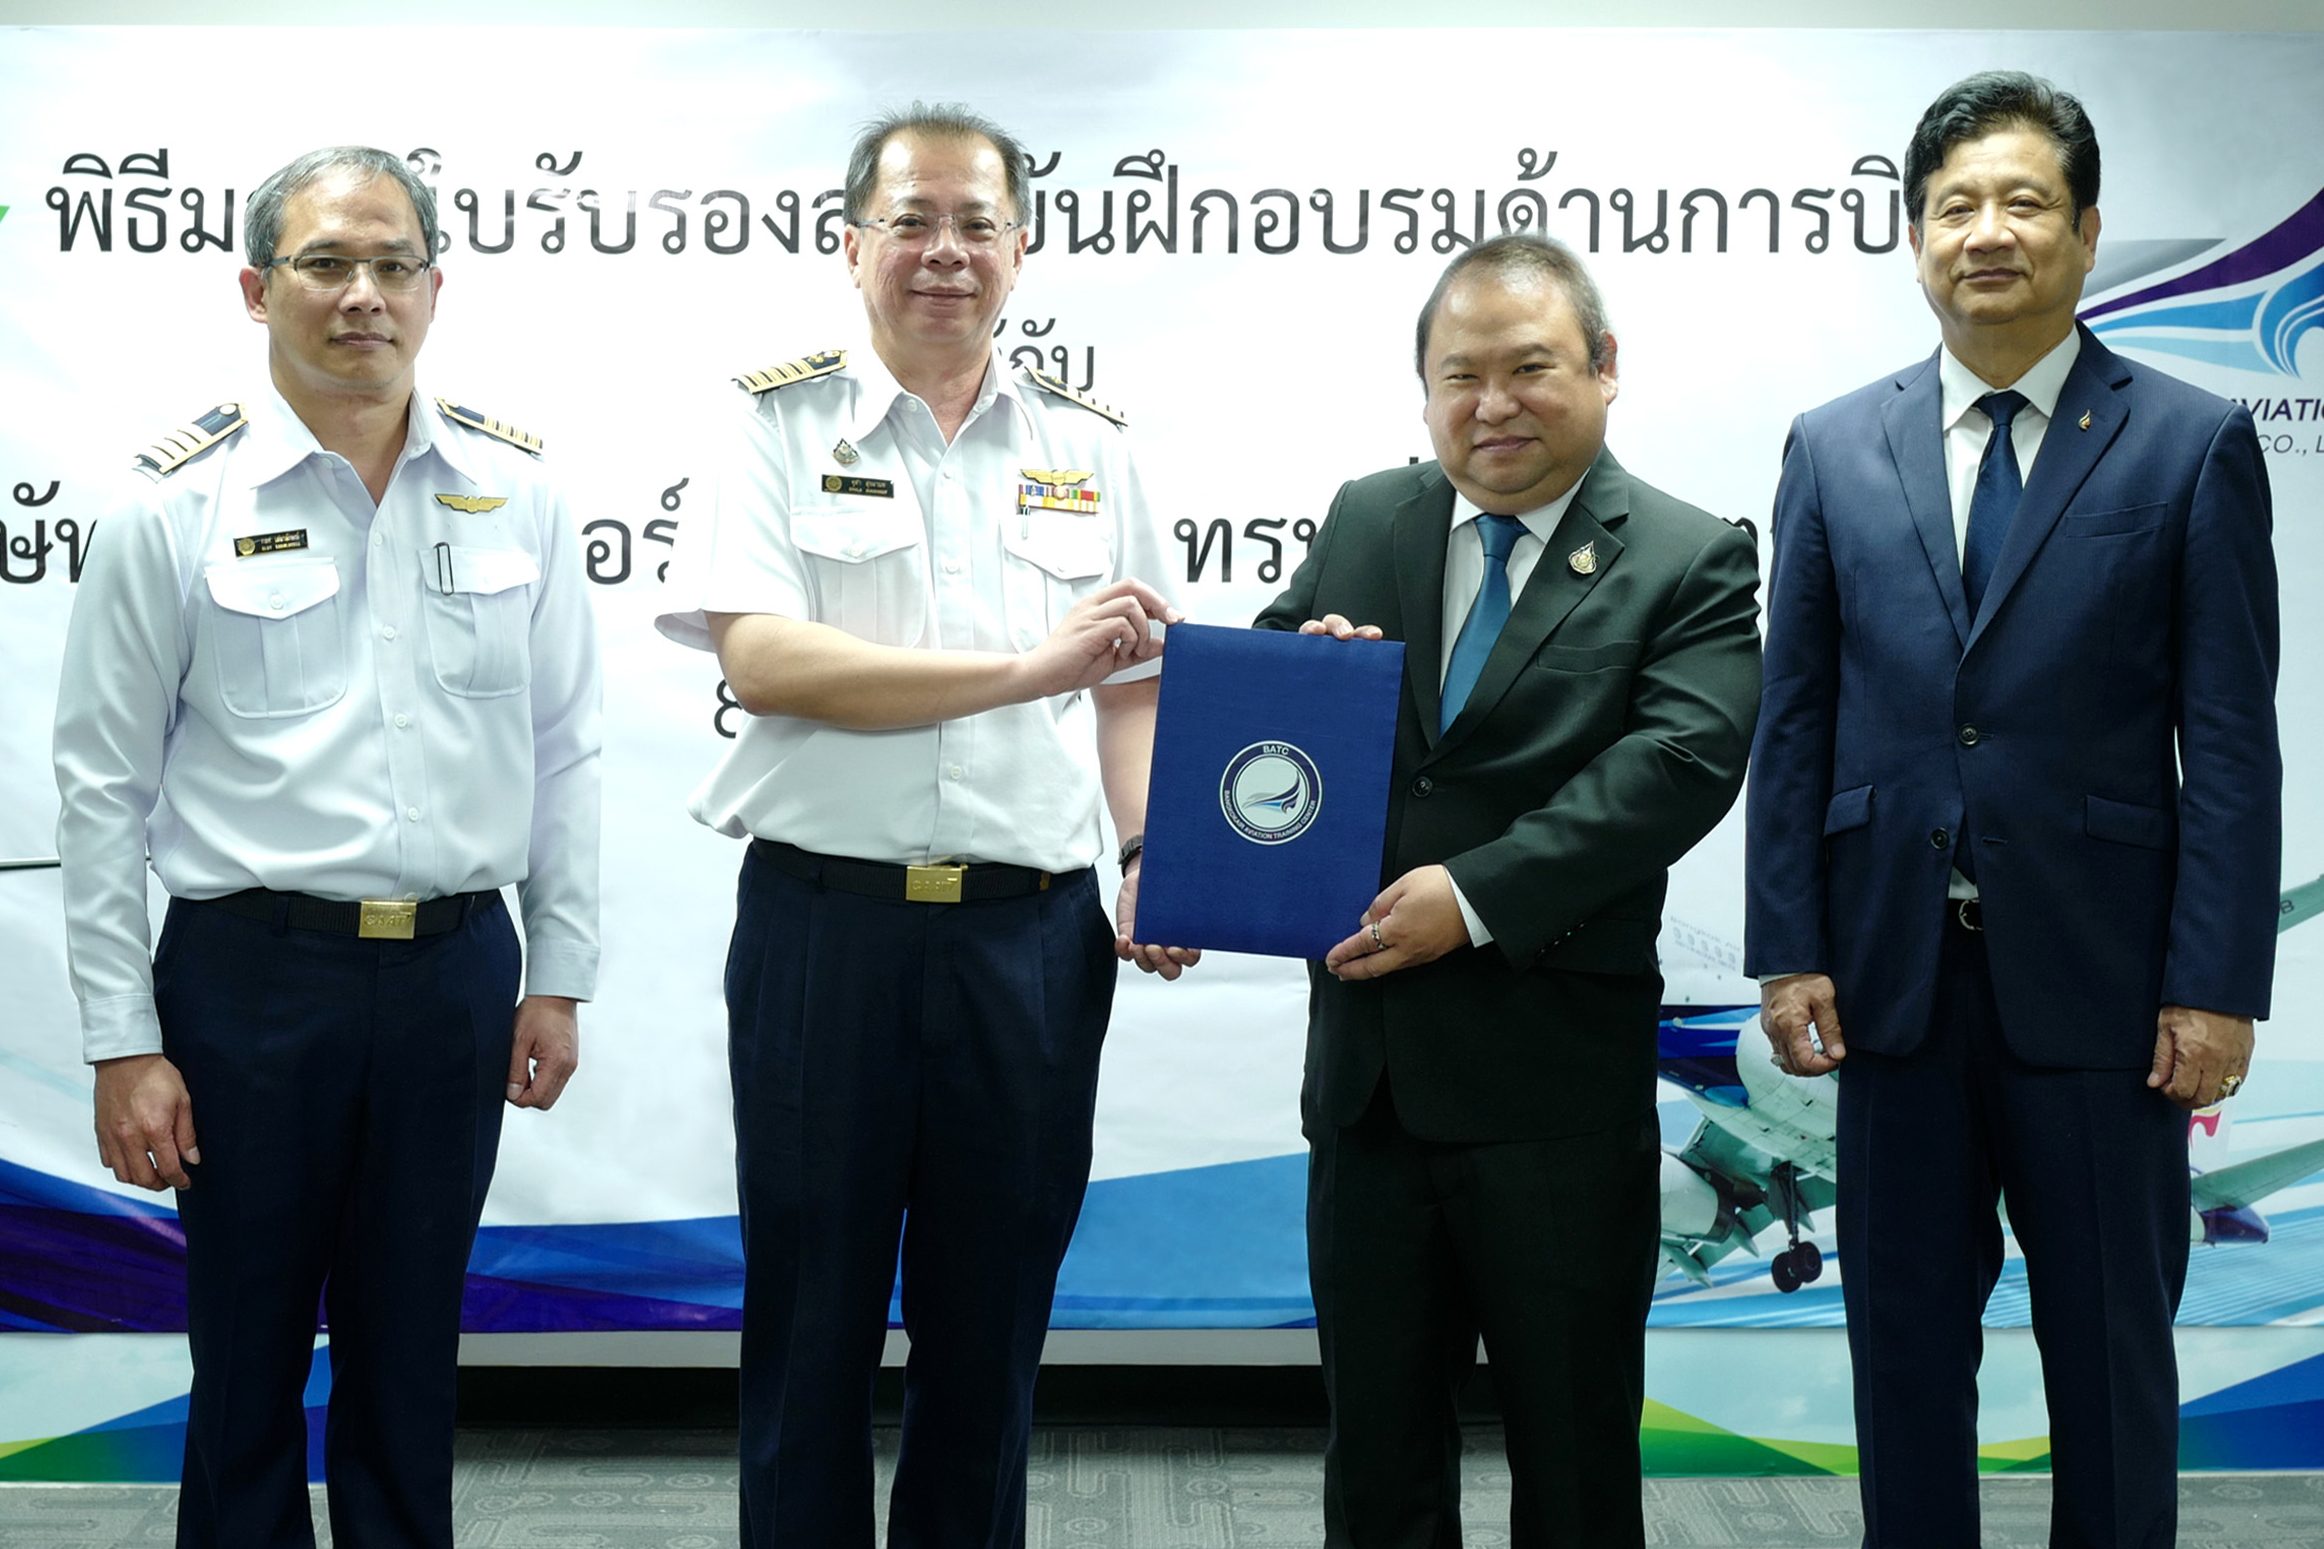 From left to right: Glot Sanalaksna, Manager of Personnel Licensing Department, Civil Aviation Authority of Thailand; Chula Sukmanop, Director General, Civil Aviation Authority of Thailand; Puttipong Prasarttong-Osoth, President of Bangkok Airways Public Company Limited; and AM. Dechit Chareonwong, President of Bangkok Aviation Training Center Company Limited. Click to enlarge.